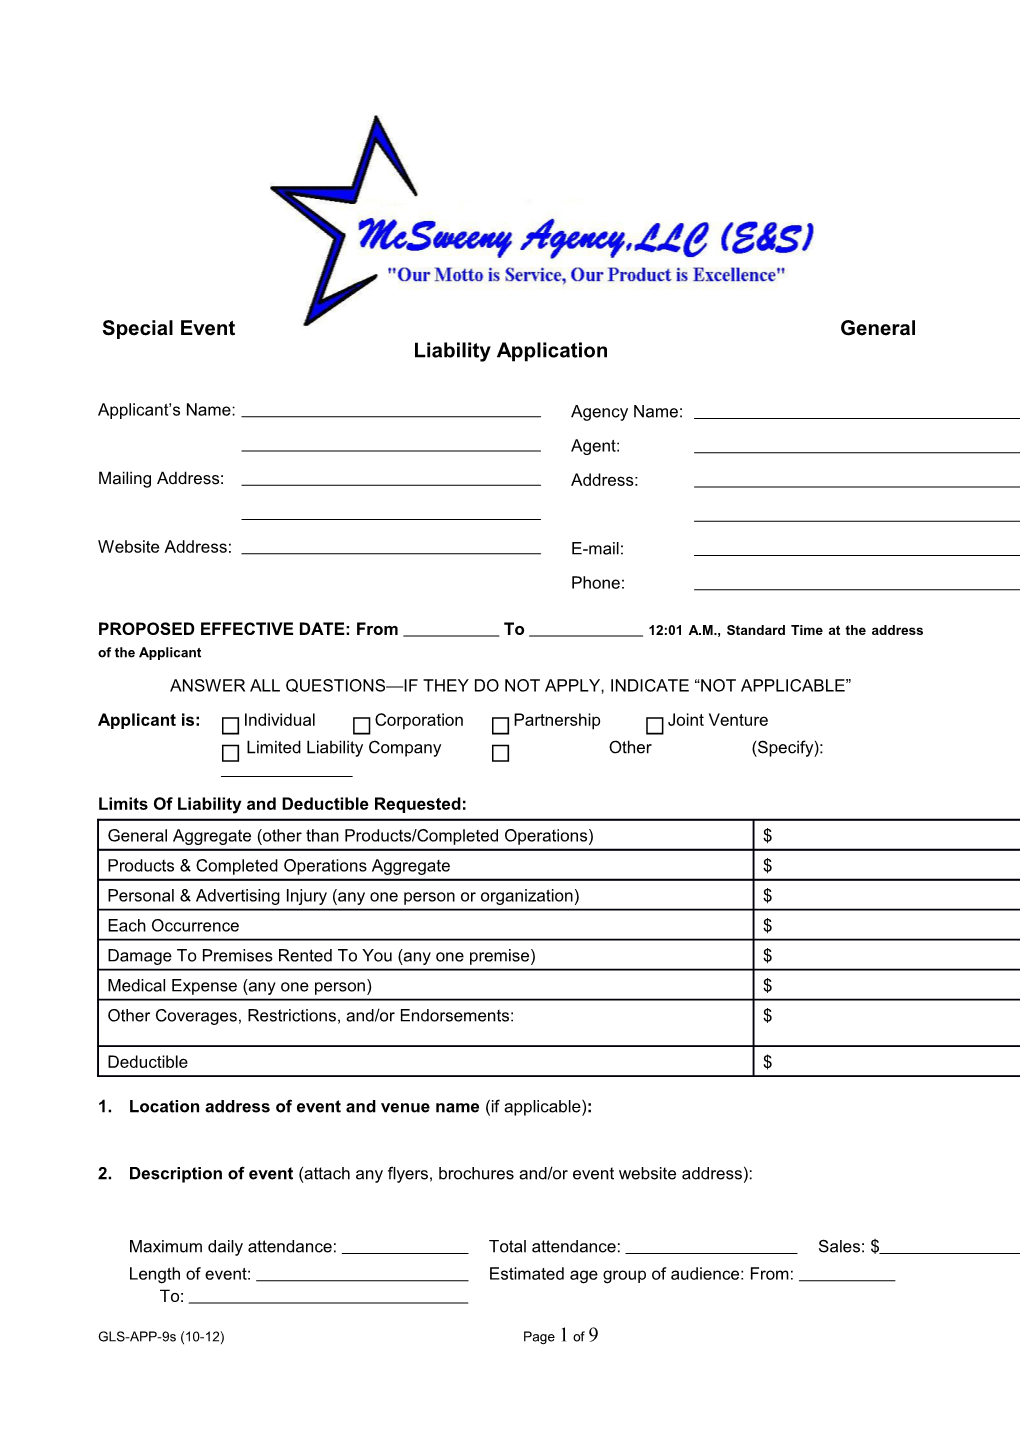 Special Event General Liability Application